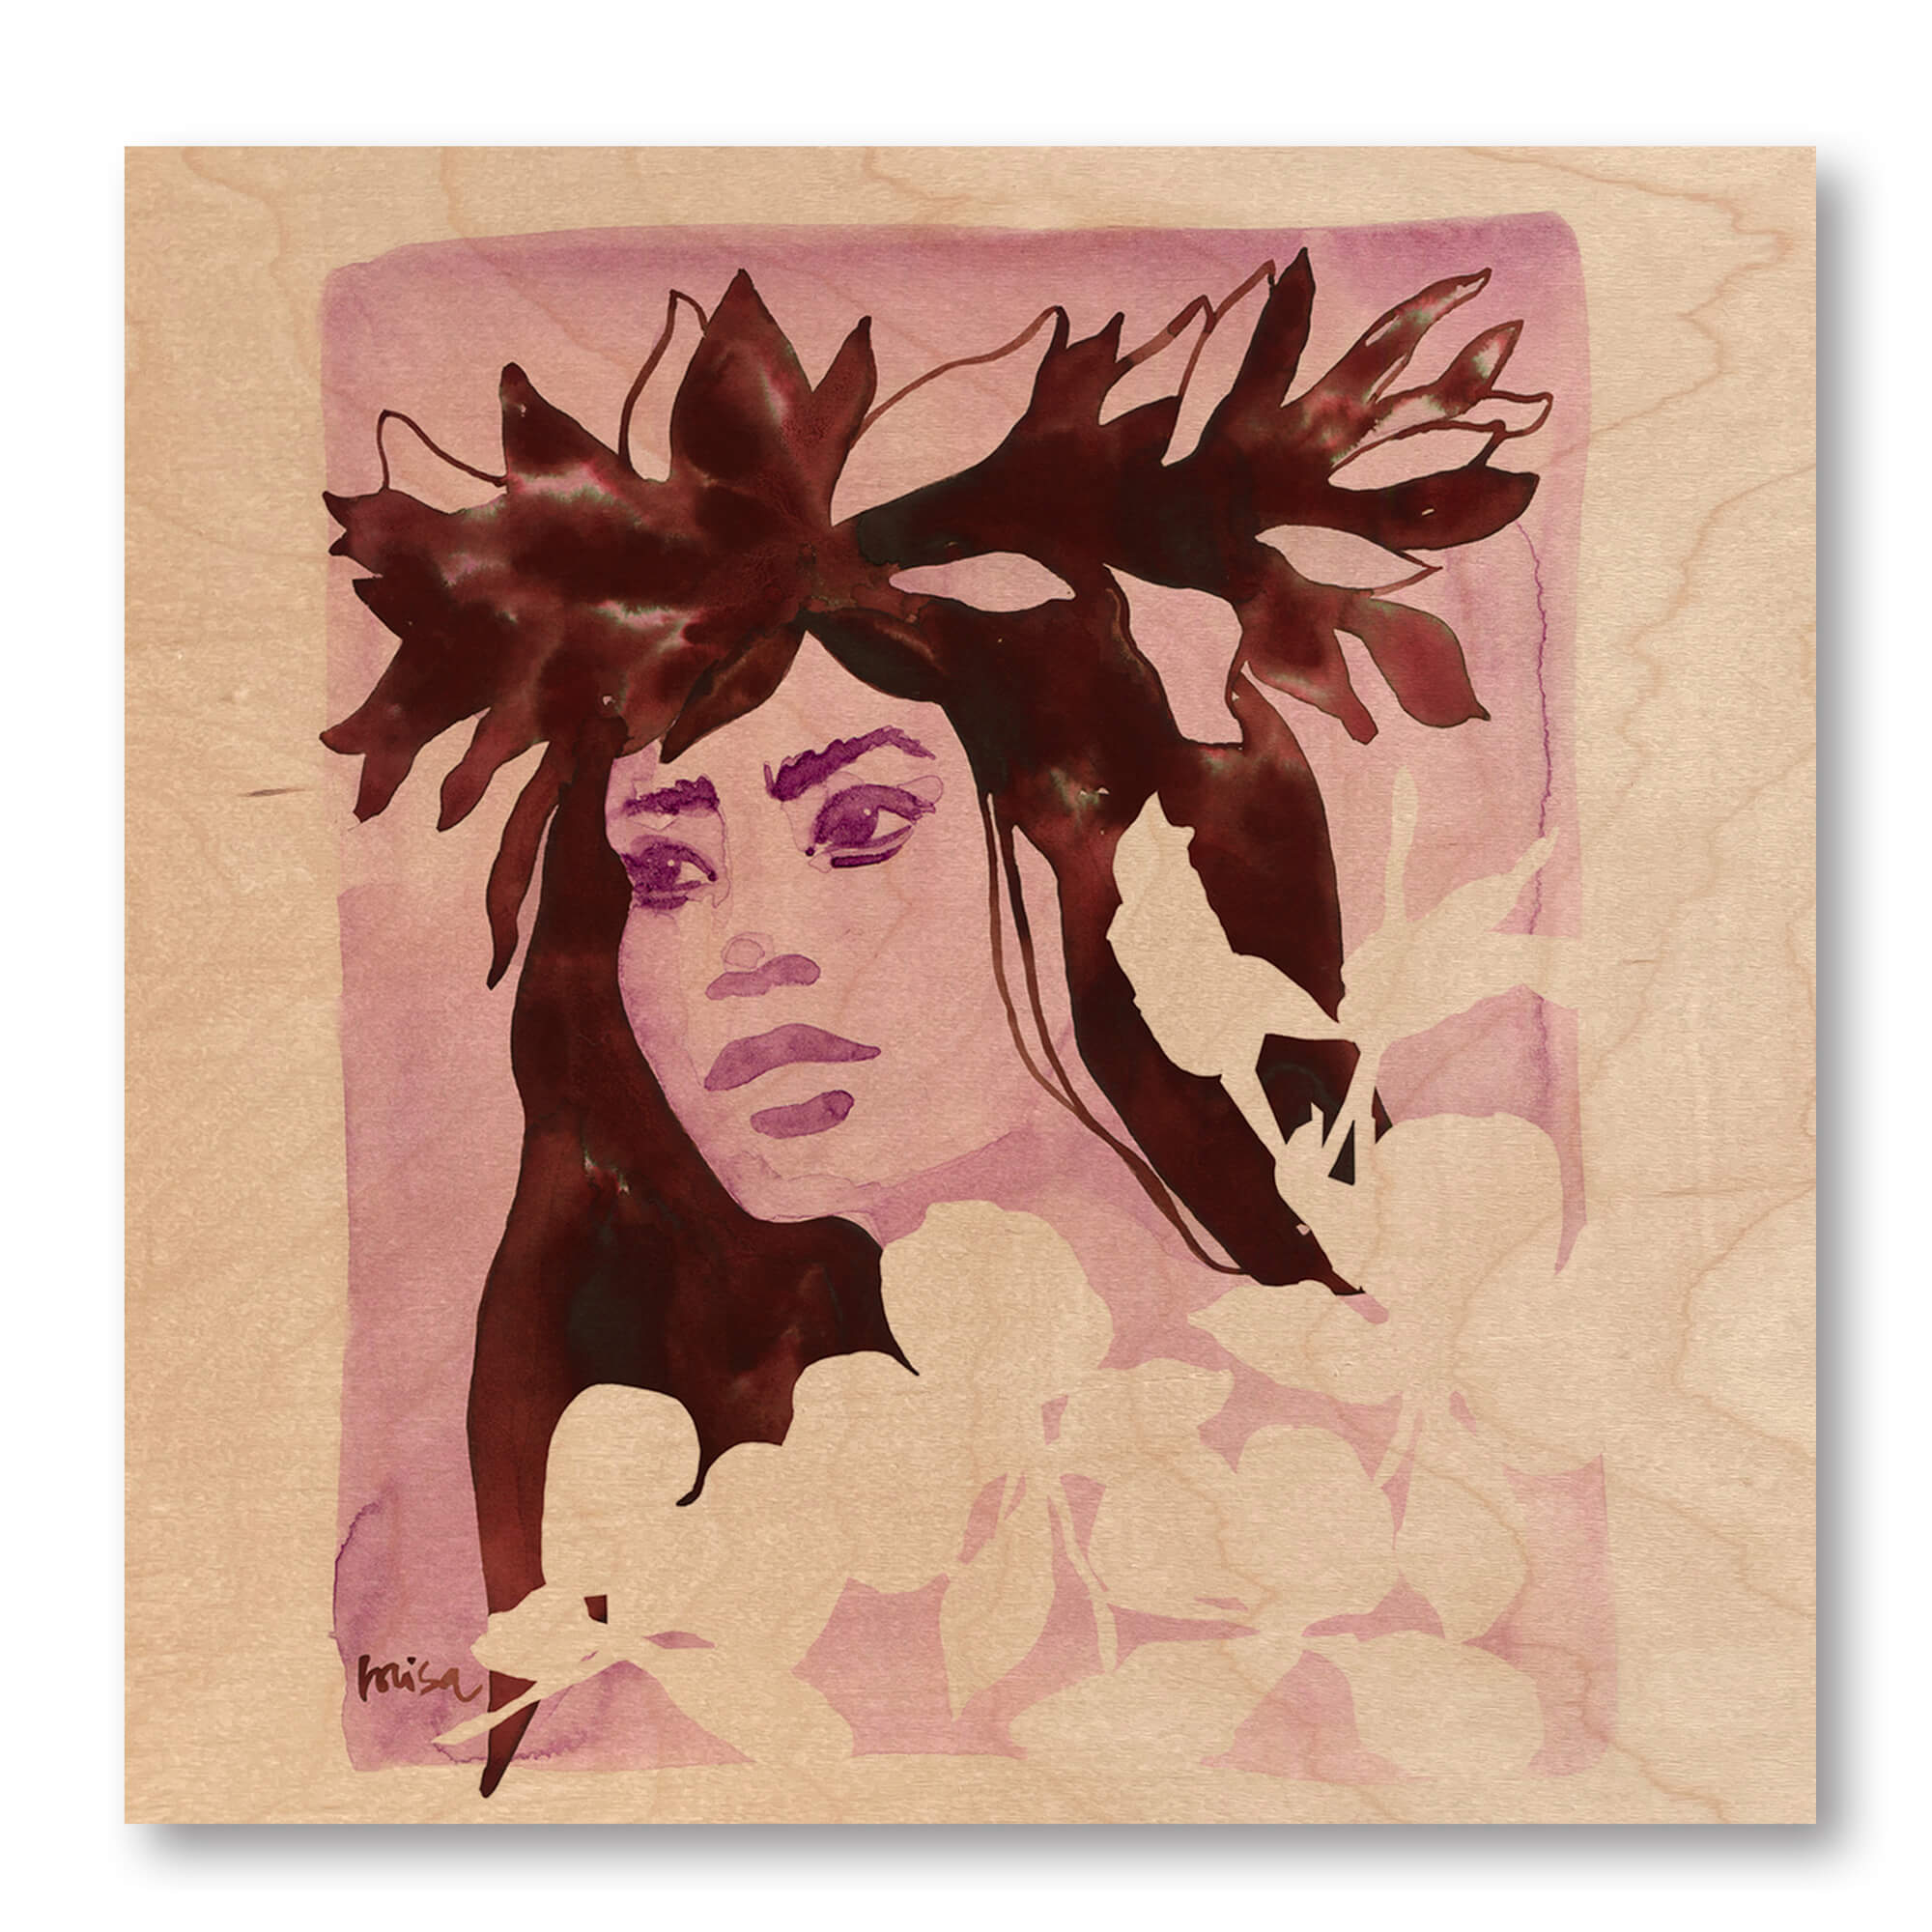 Wood print of watercolor artwork featuring a hula woman's portrait with ginger flowers by Hawaii artist Lovisa Oliv